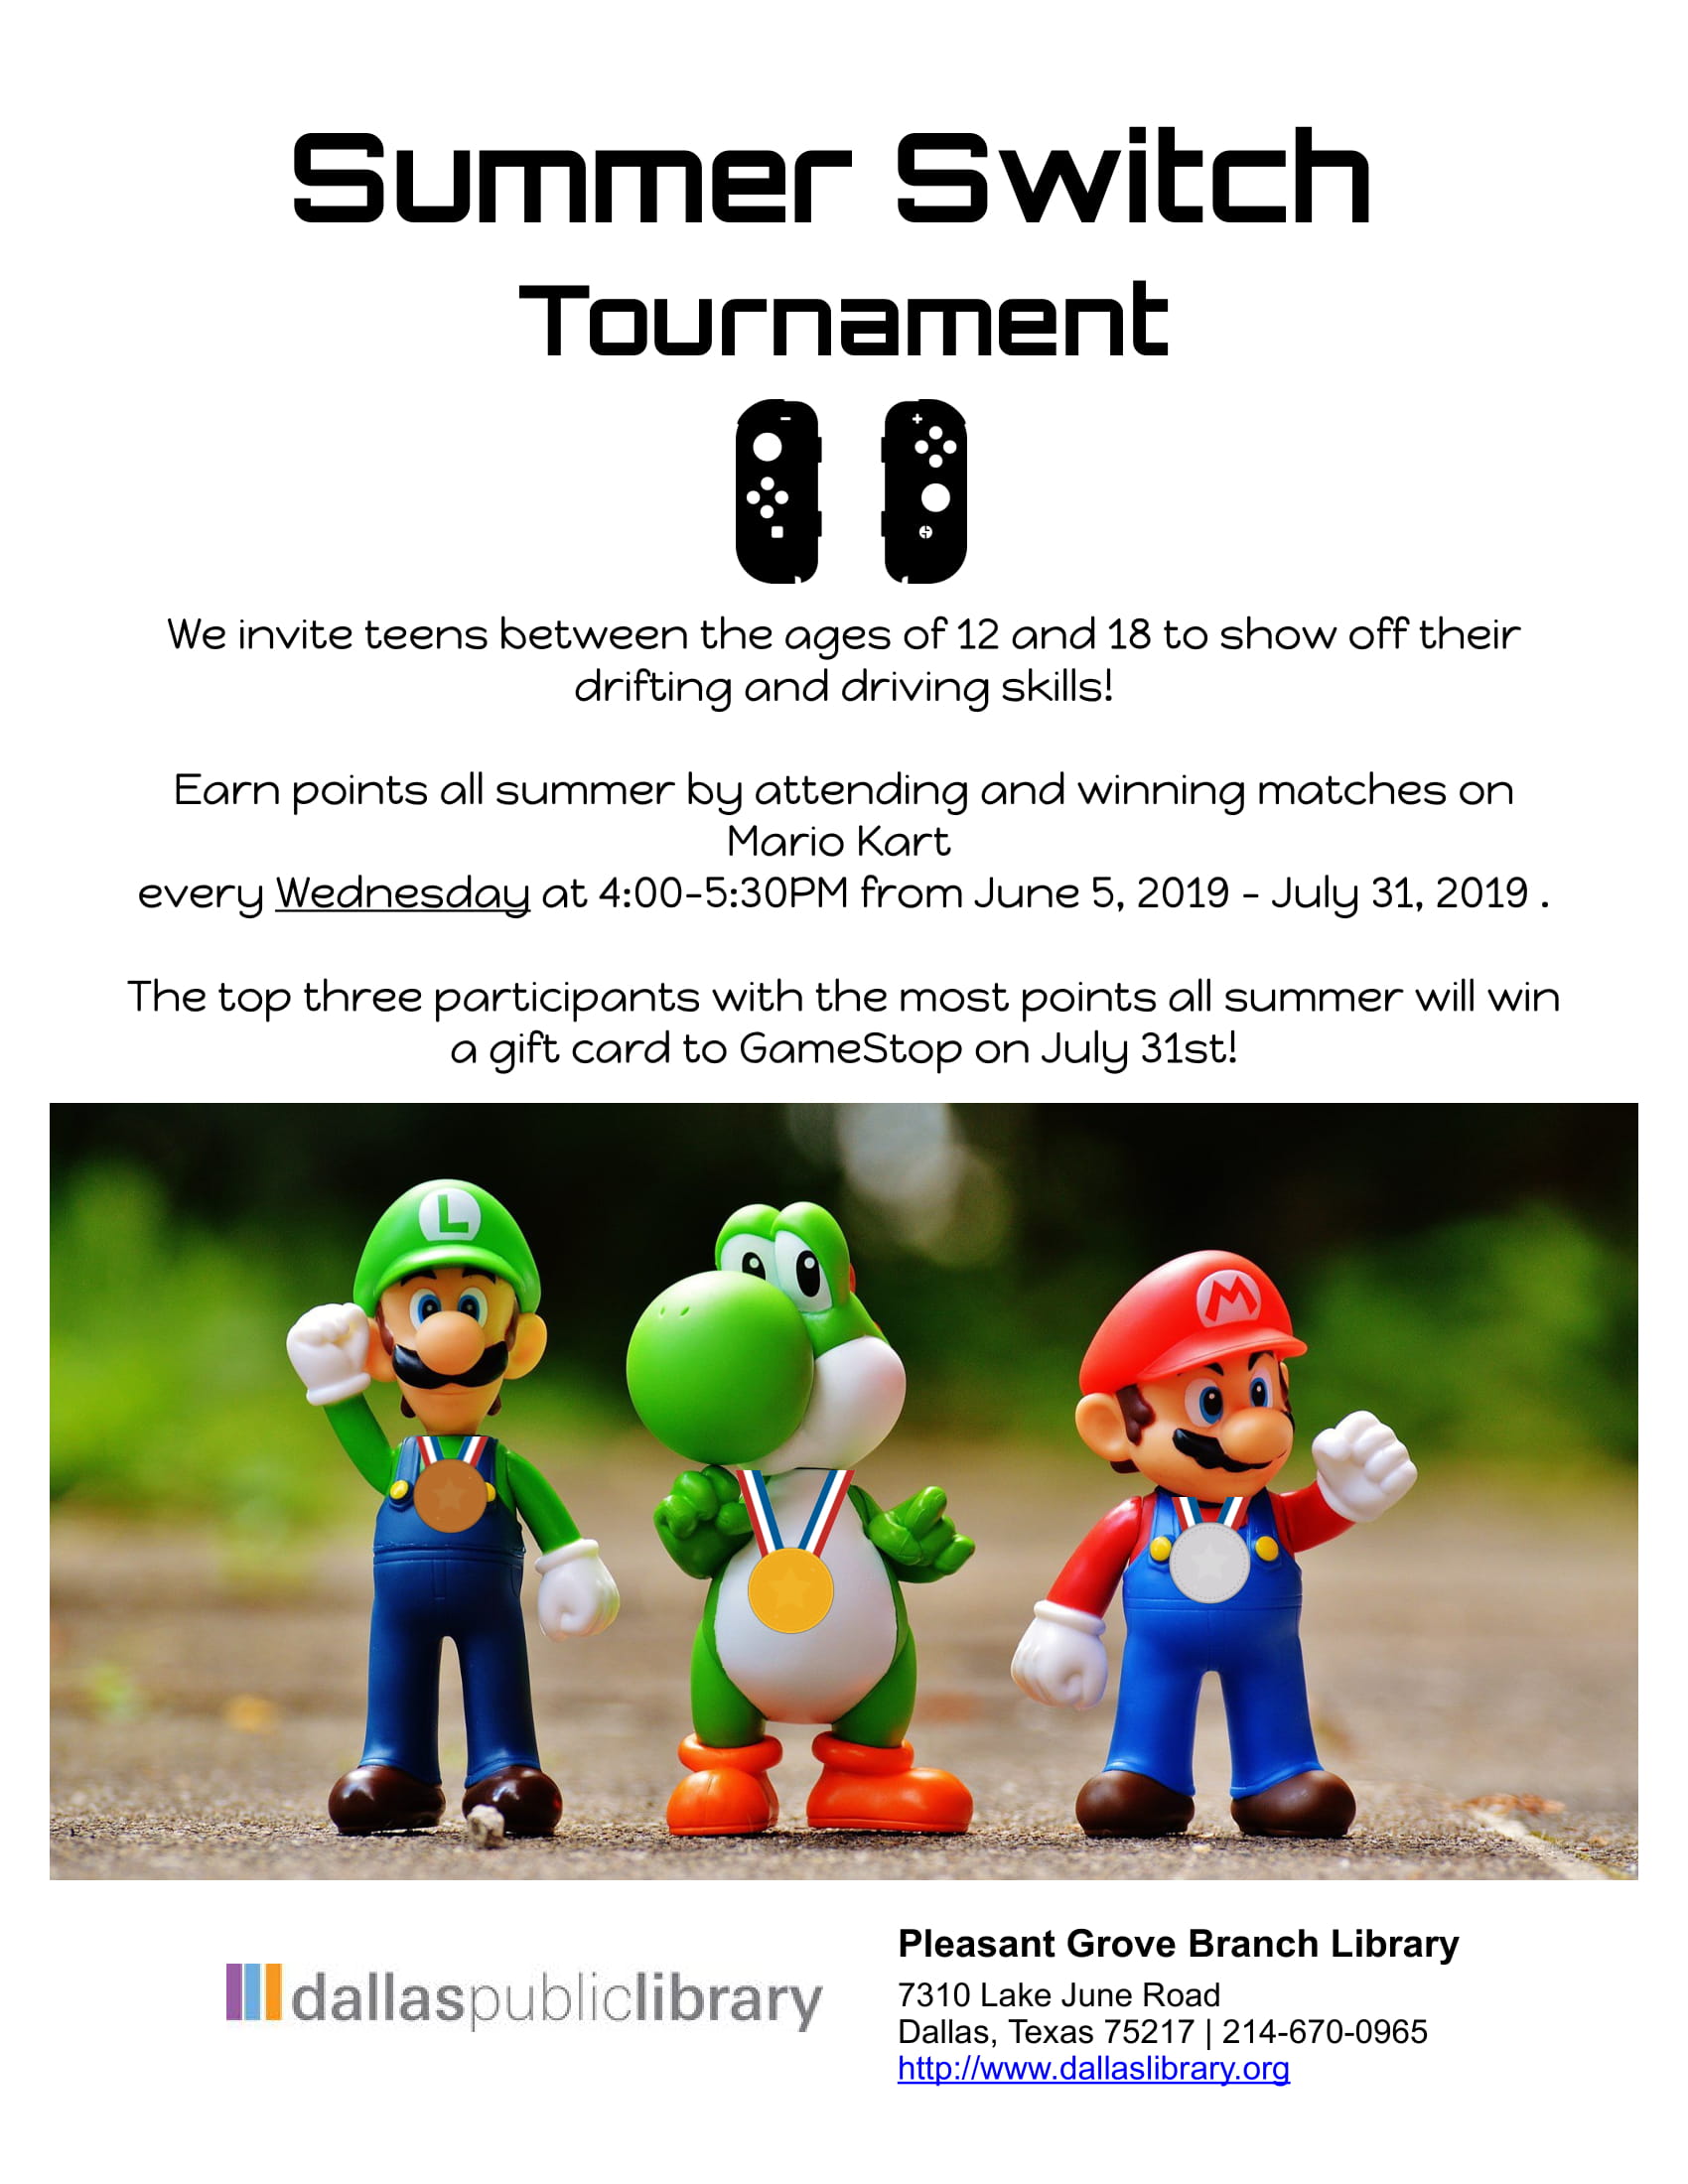 This is a flyer about the Summer Switch Tournament.